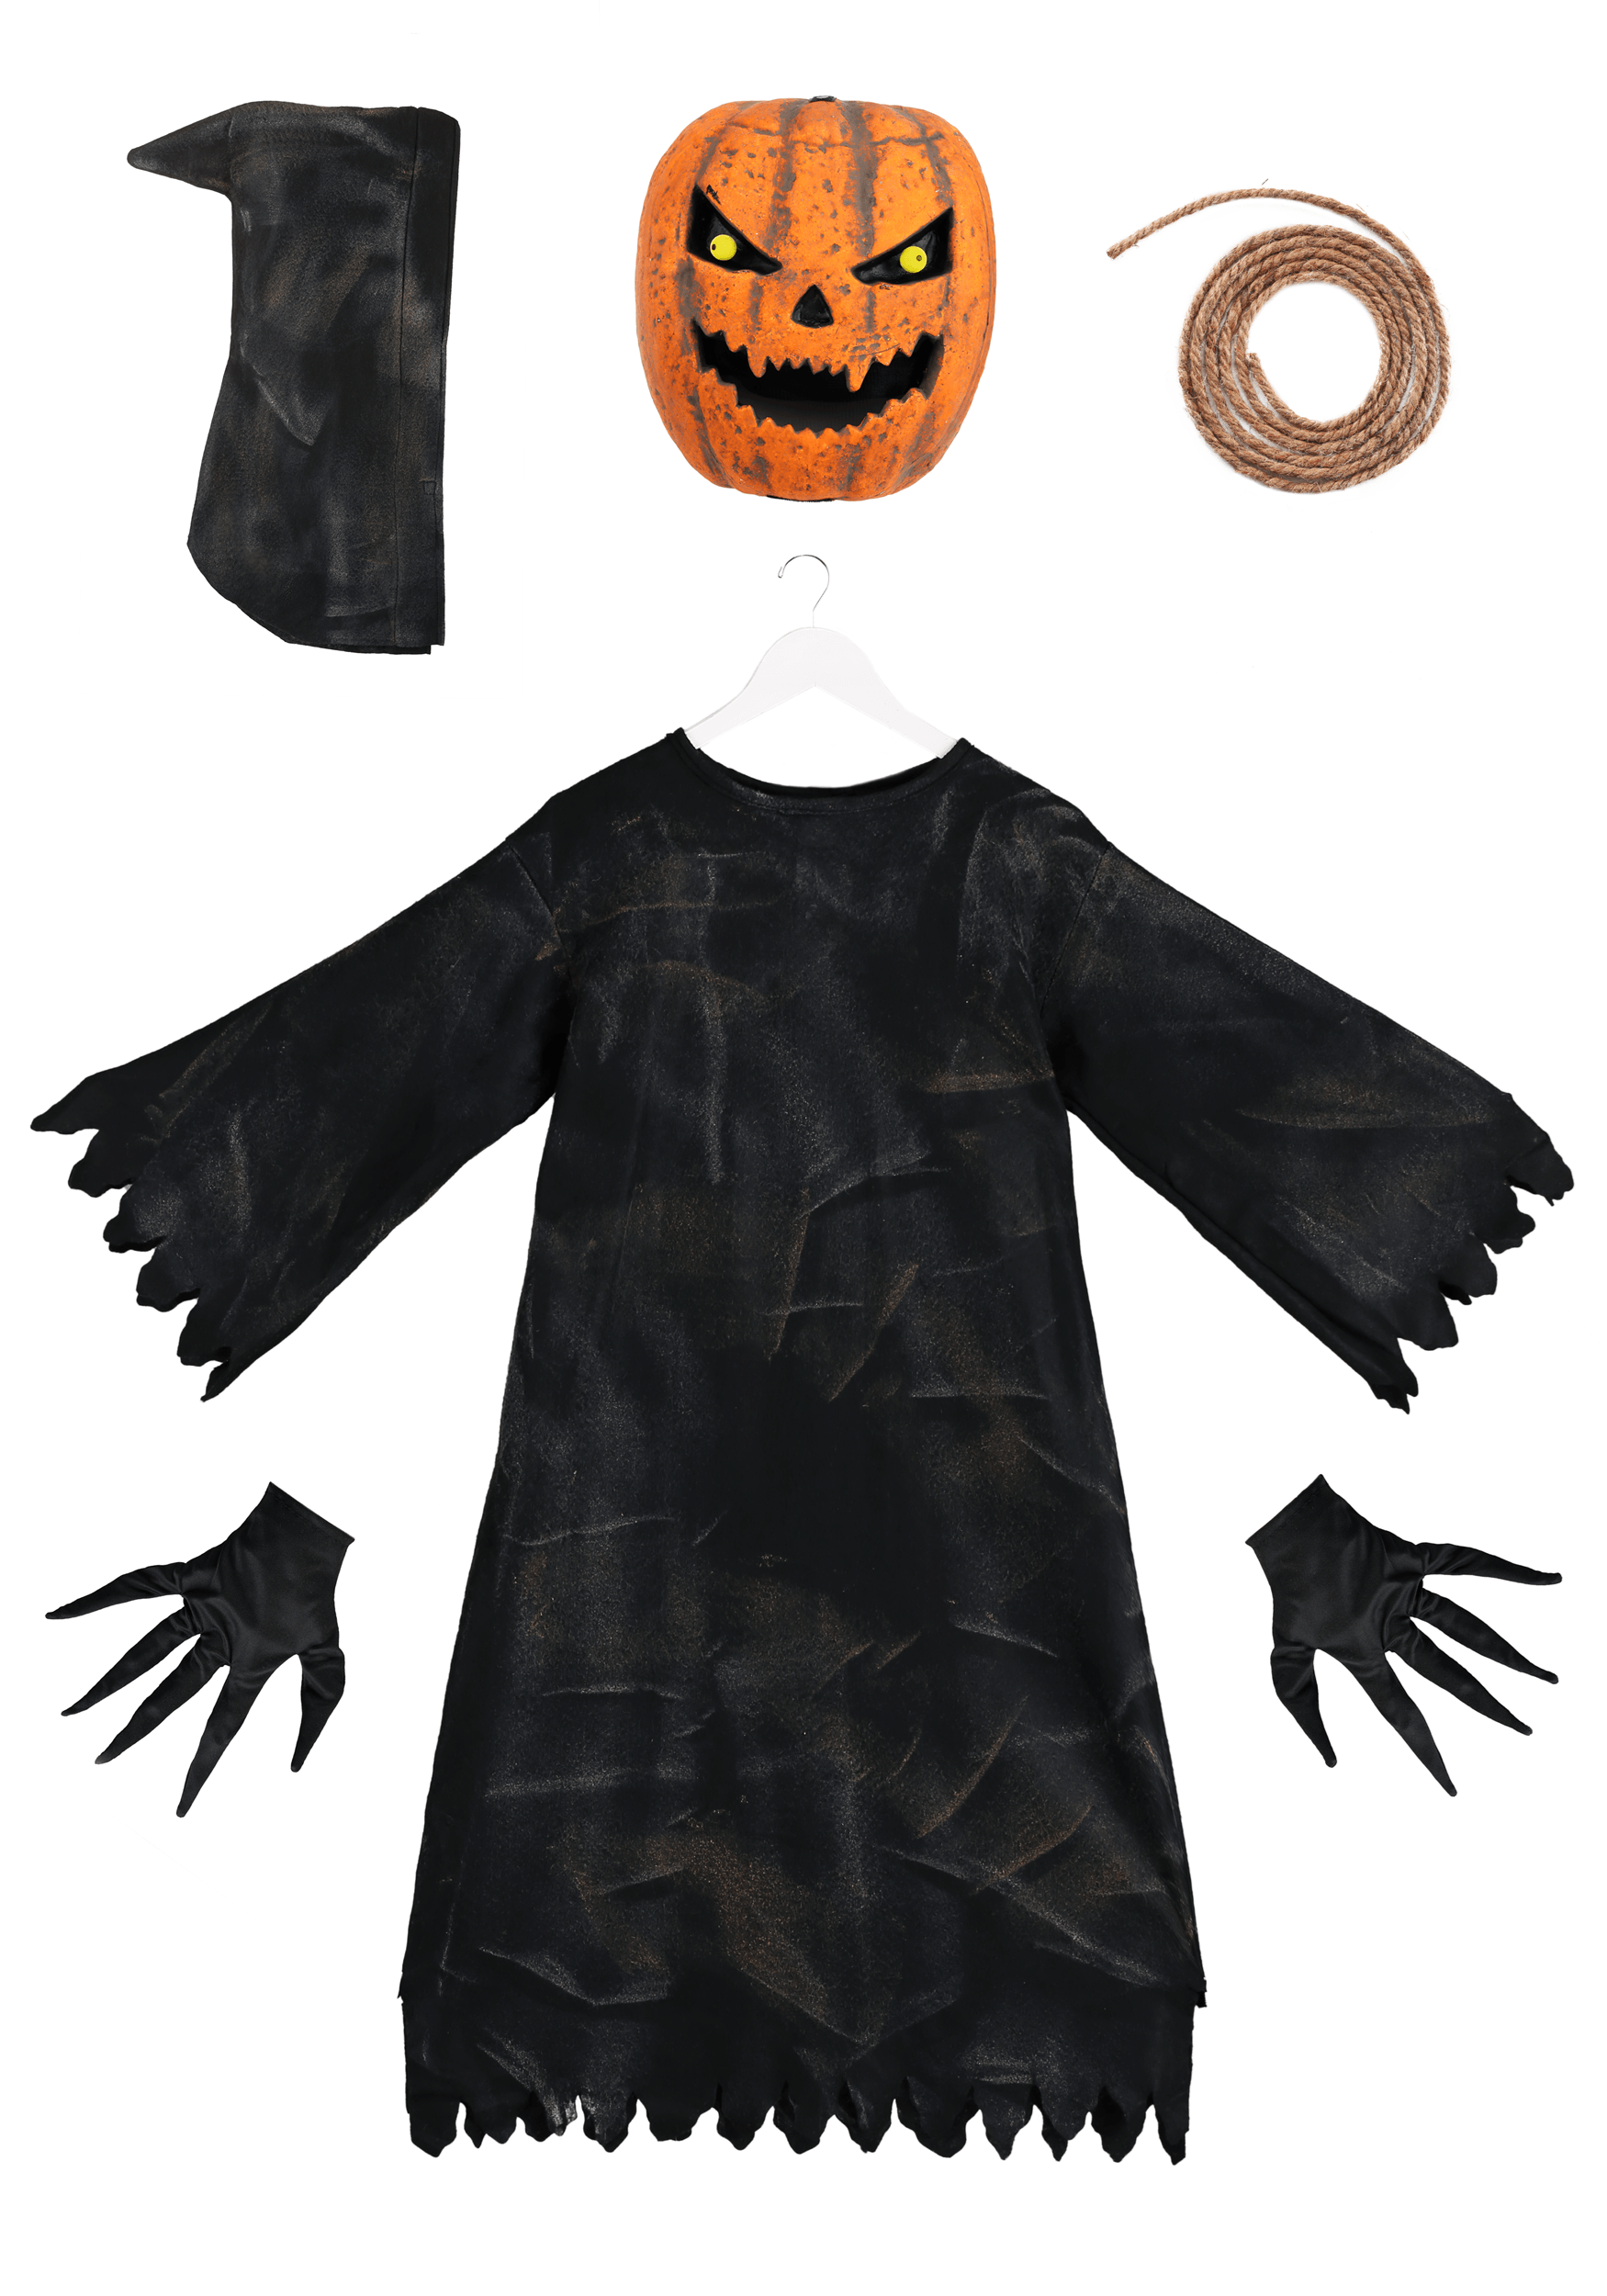 Scary Eyed Pumpkin Costume for Kids